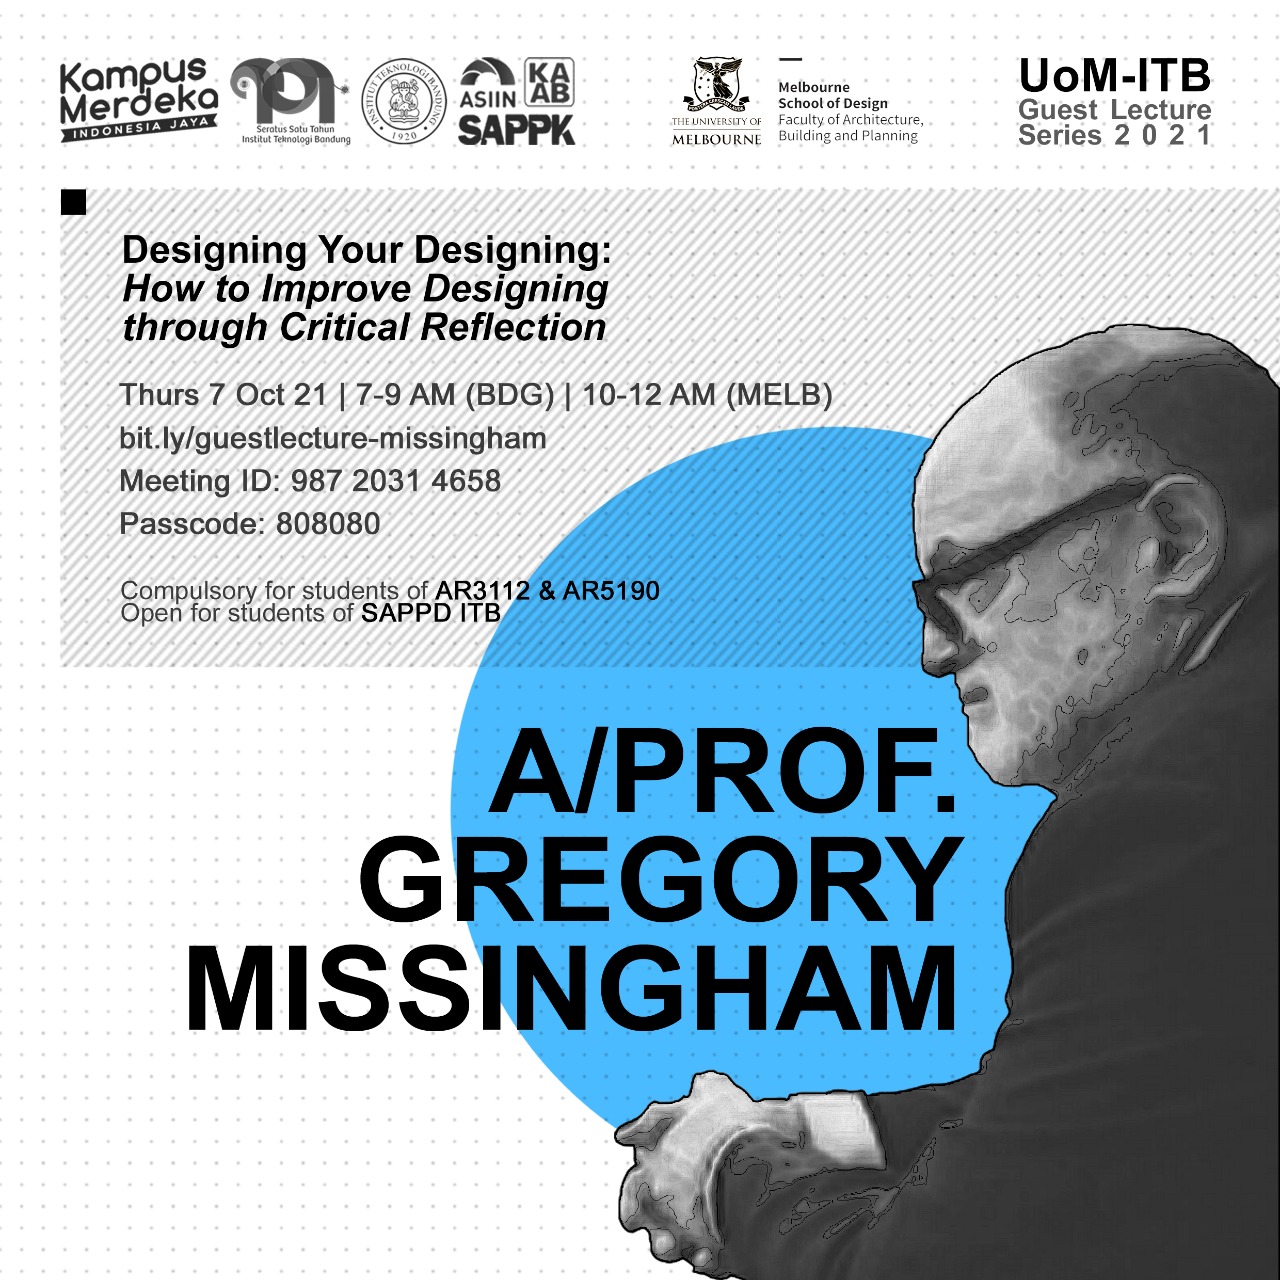 UoM-ITB Guest Lecture Series 2021 DESIGNING YOUR DESIGNING: How to Improve Designing through Critical Reflection